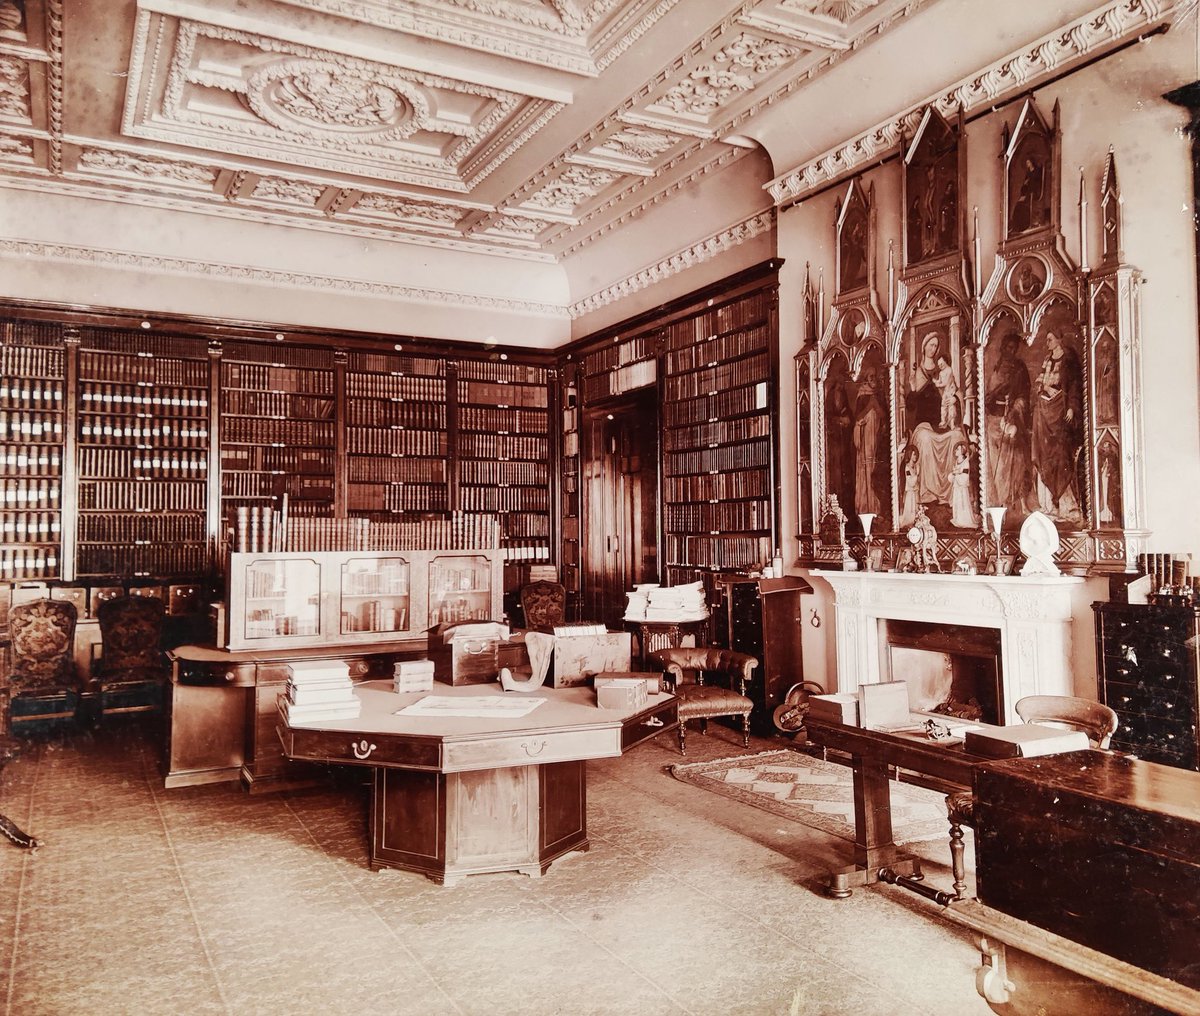 #HaighHall once housed the largest private library in Europe📖The Bibliotecha Lindesiana was a vision of the human intellect📖Our vision for #HaighHall funded by @luhc @HeritageFundUK @WiganCouncil & @ace_national places education for all at its heart ❤️